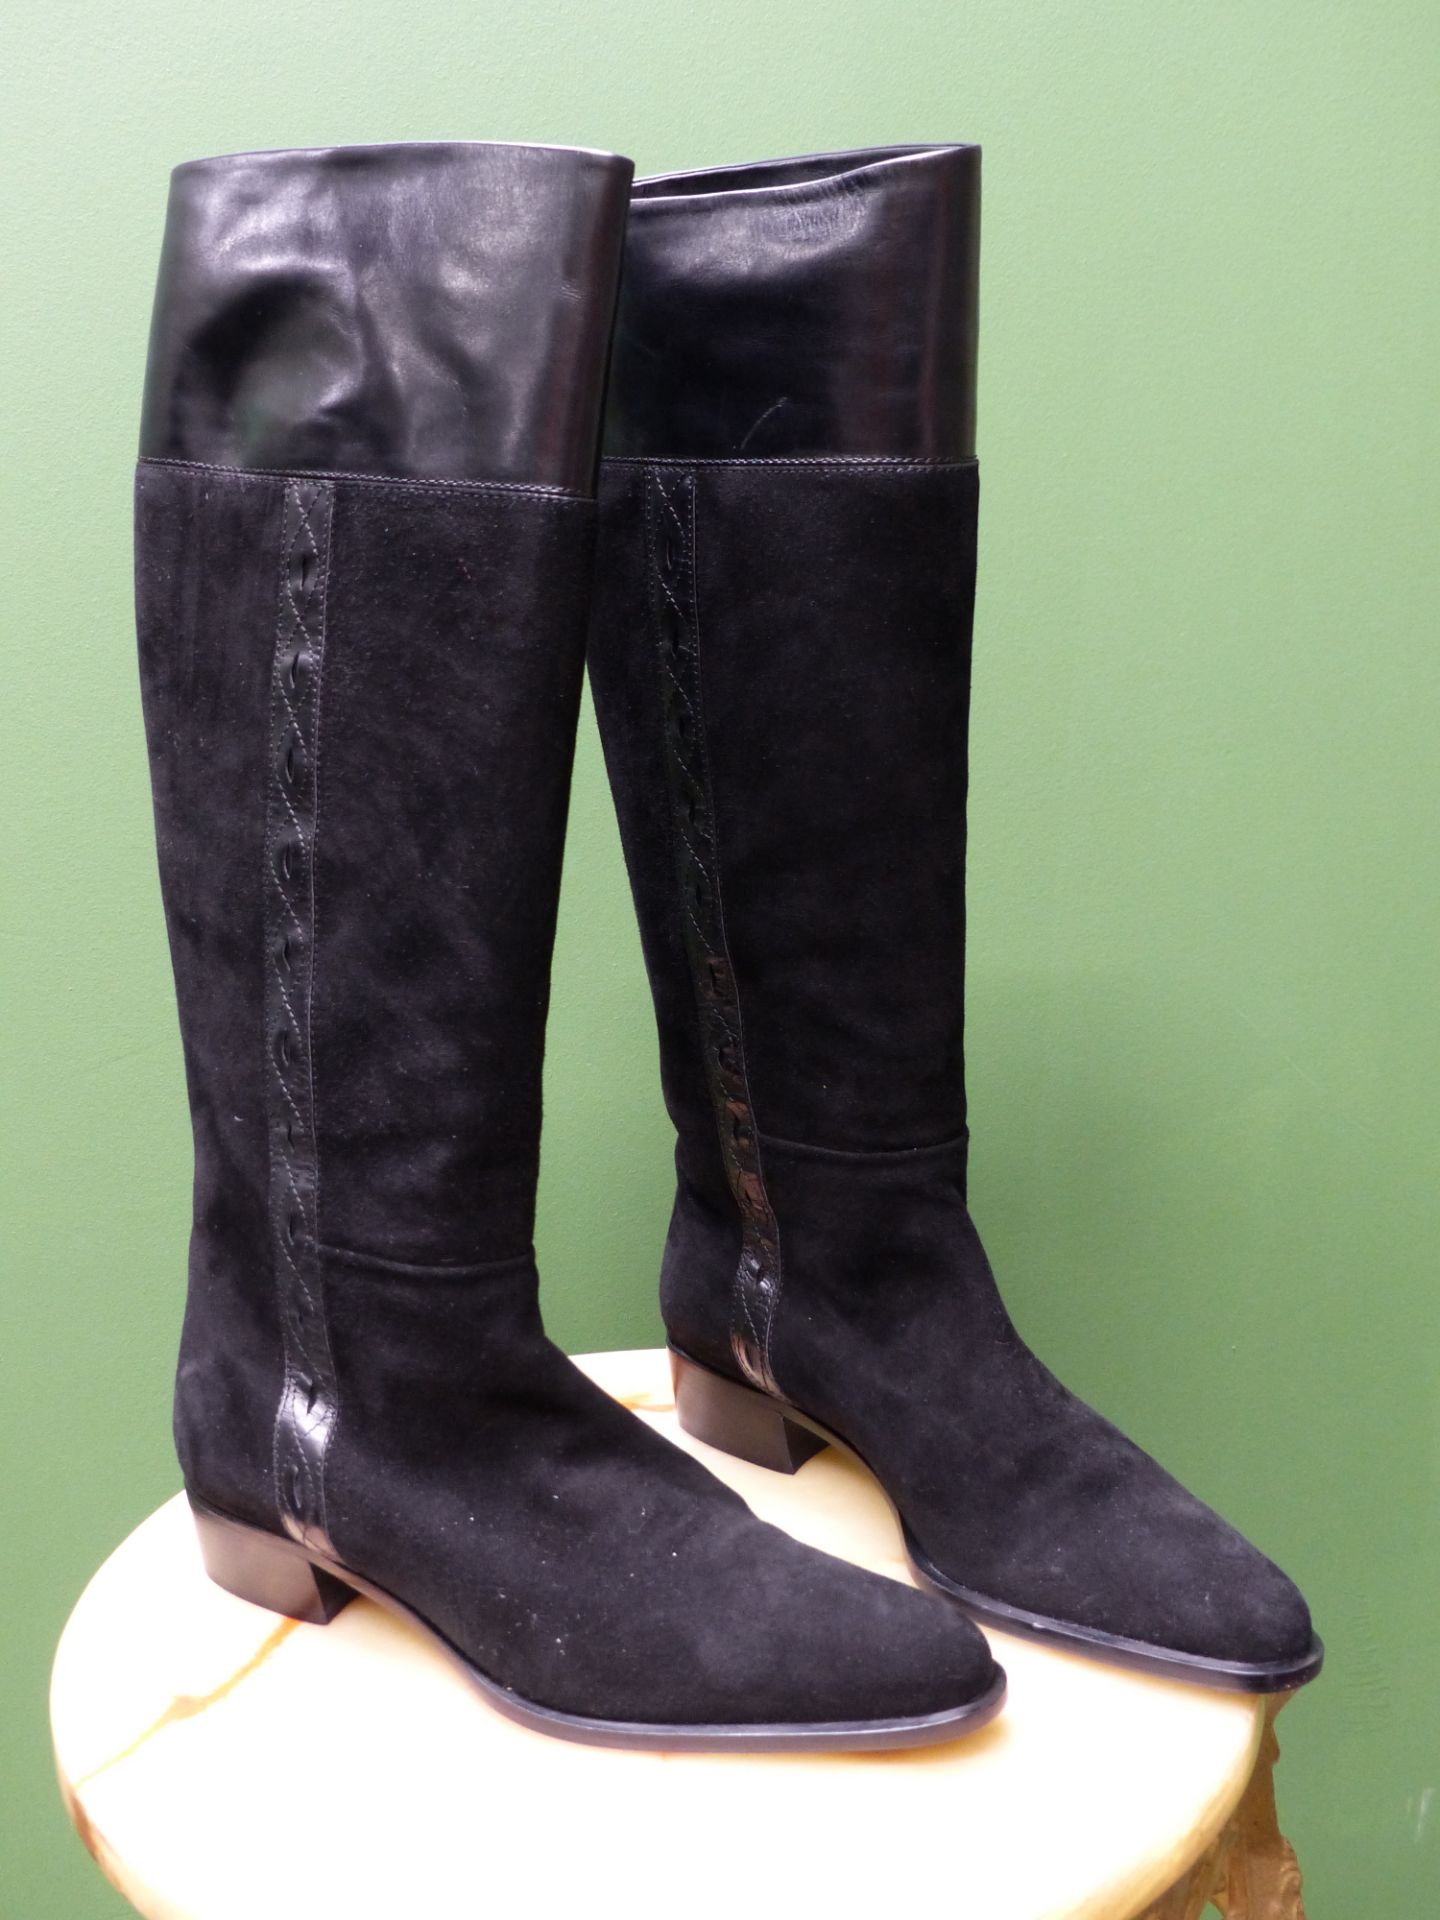 BOOTS. LORENZO BANFI MILANO. KNEE HIGH SUEDE AND LEATHER BLACK BOOTS. SIZE EUR 39.5. - Image 2 of 6